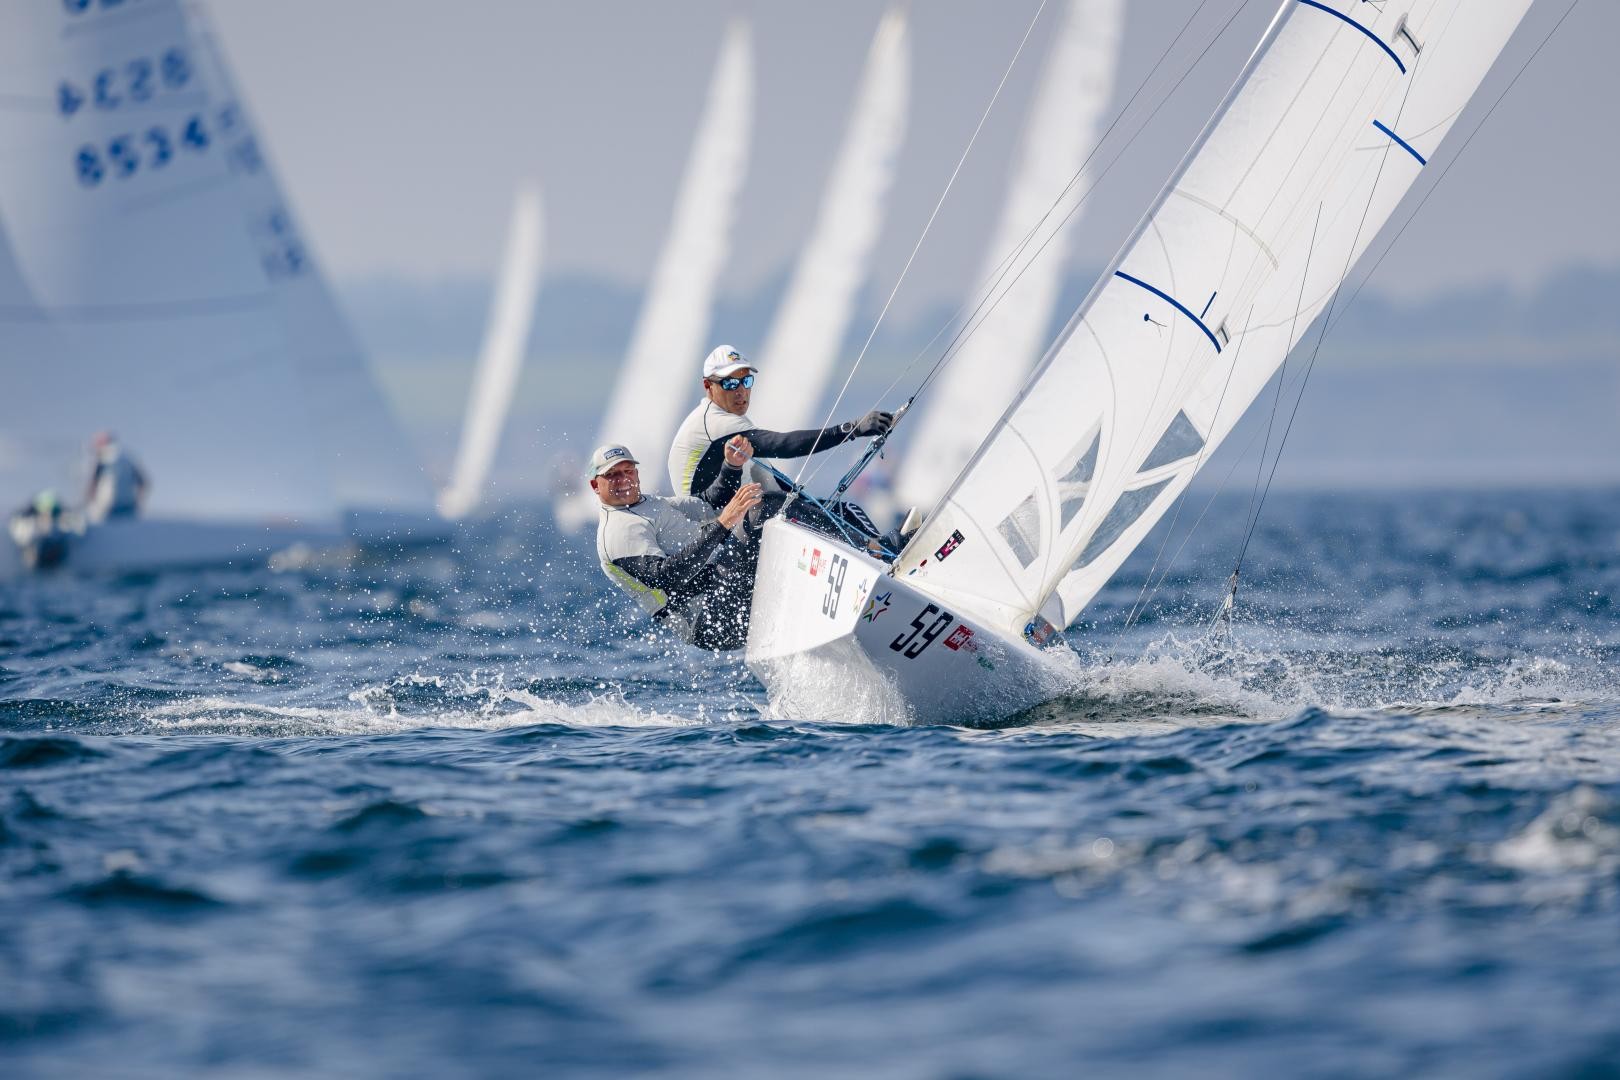 Two races and two wins for the Diego Negri and Frithjof Kleen on day four of the Star World Championship